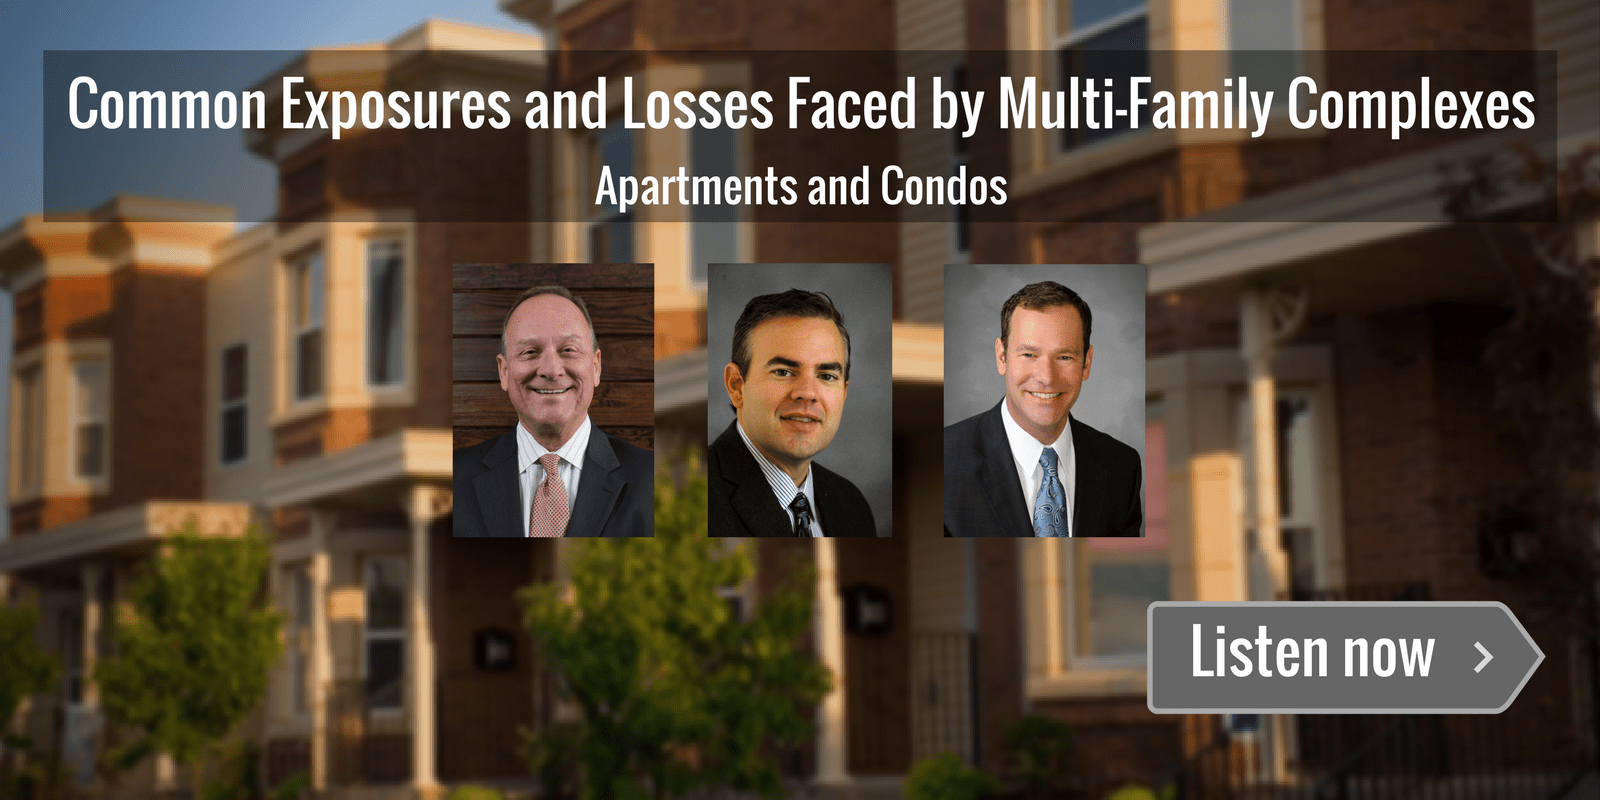 Multi-Family Complexes Apartments and Condos Exposures Losses